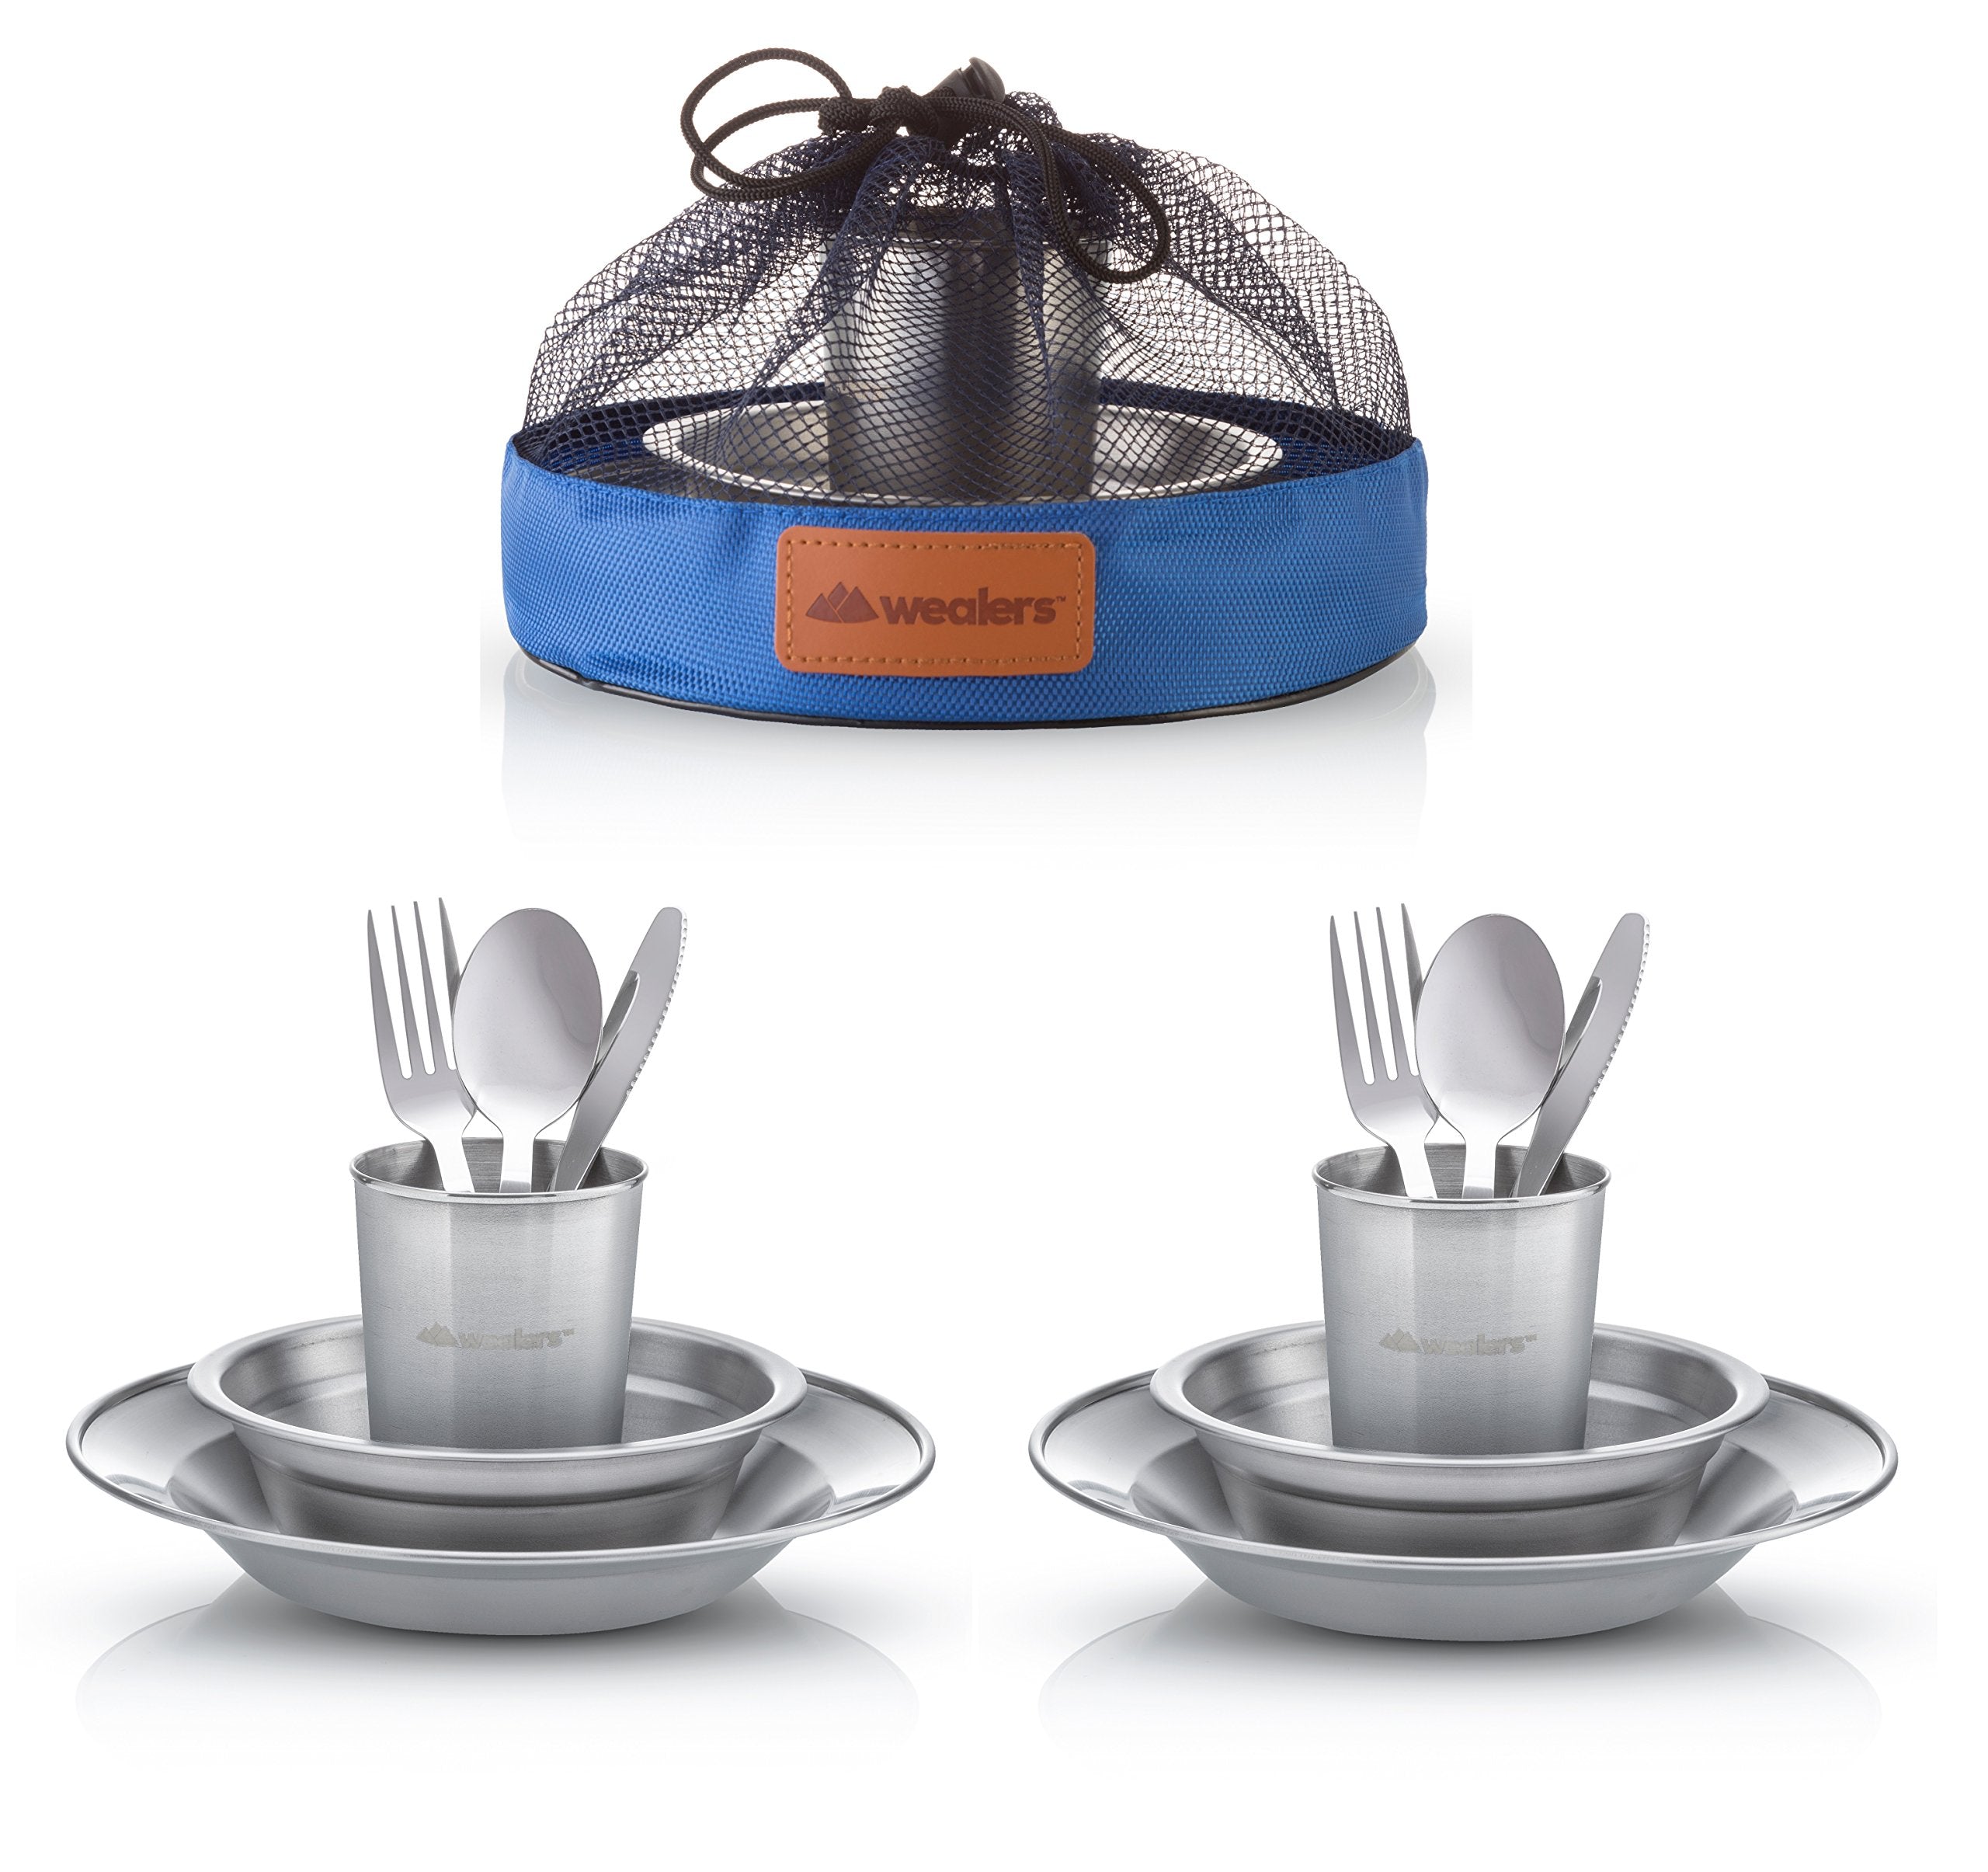 Unique Complete Messware Kit Polished Stainless Steel Dishes Set| Tableware| Dinnerware| Camping| Includes - Cups | Plates| Bowls| Cutlery| Comes in Mesh Bags  - Like New